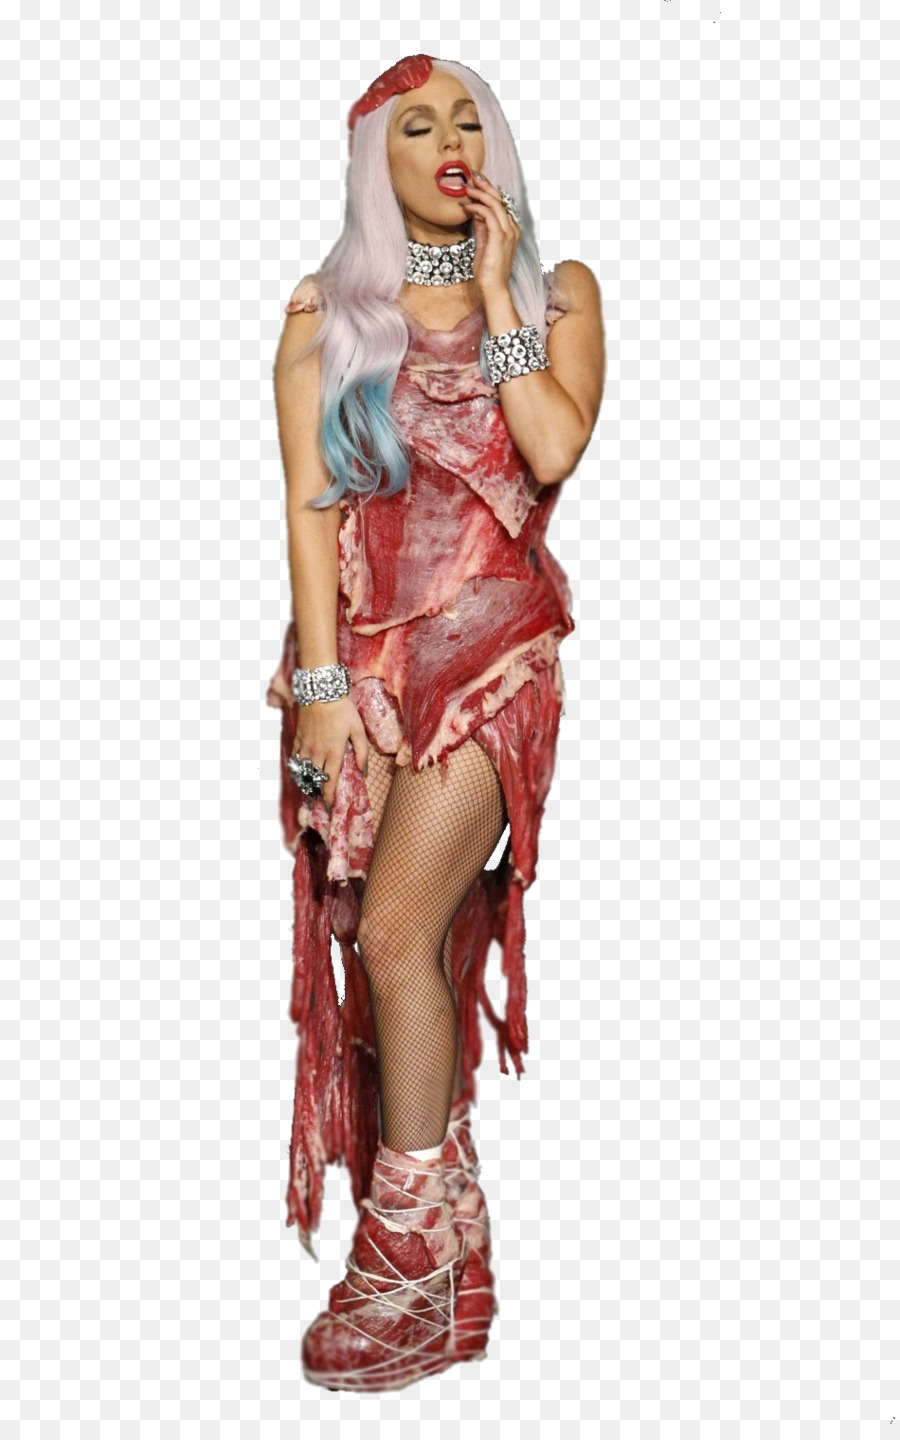 Lady Gagau0027s meat dress The Fame Christmas Tree Clip art - watching clipart